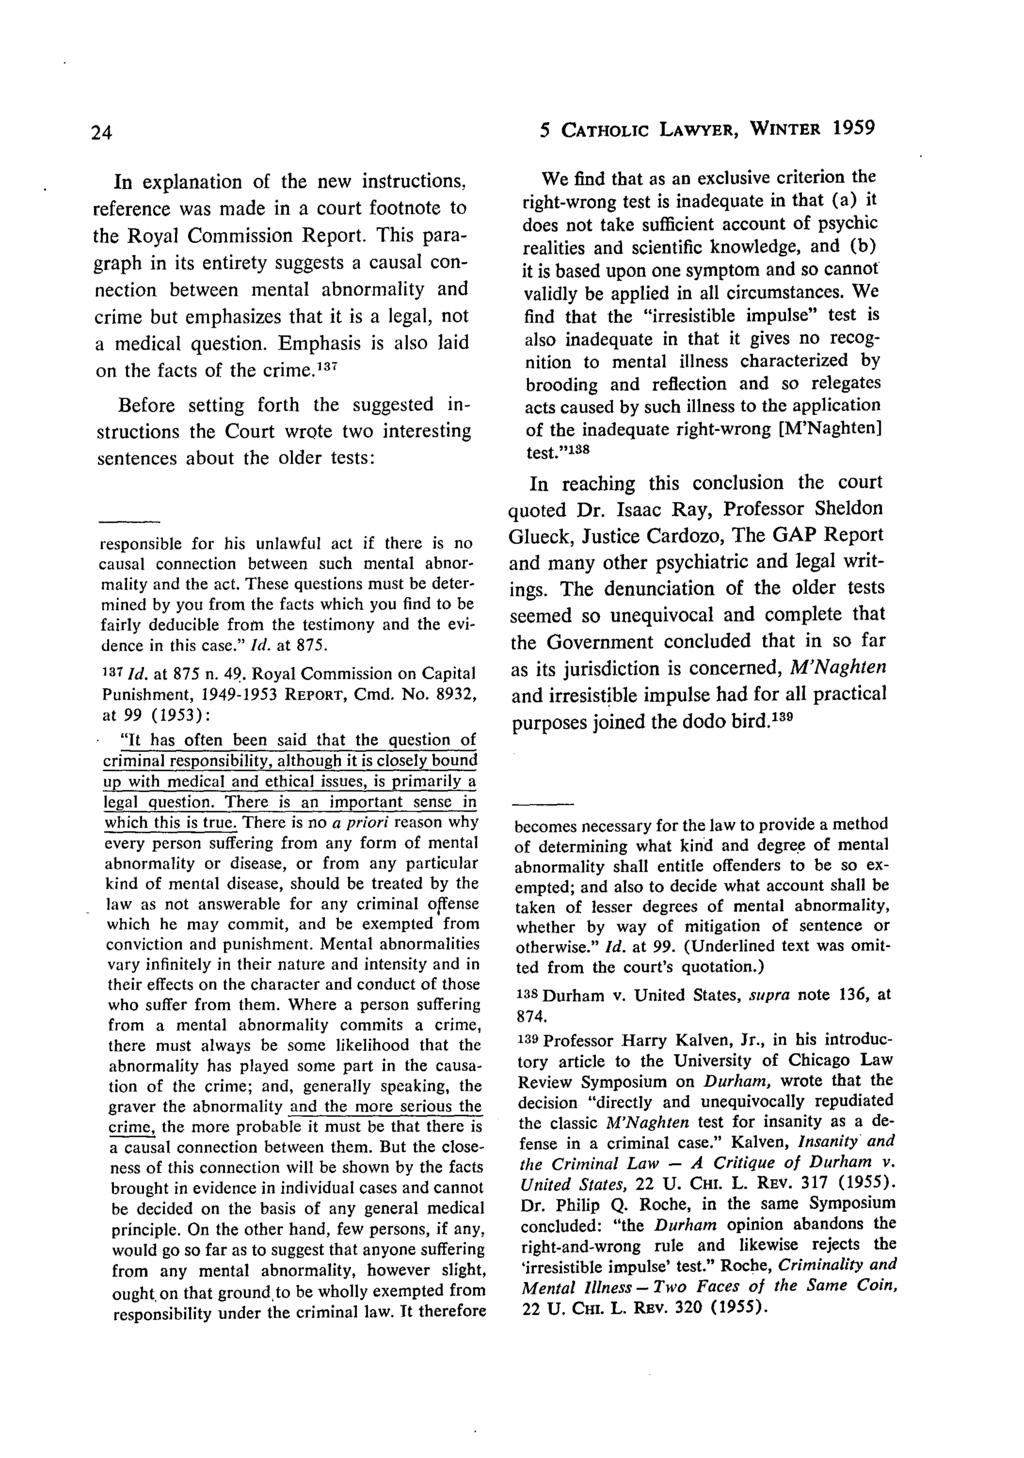 5 CATHOLIC LAWYER, WINTER 1959 In explanation of the new instructions. reference was made in a court footnote to the Royal Commission Report.